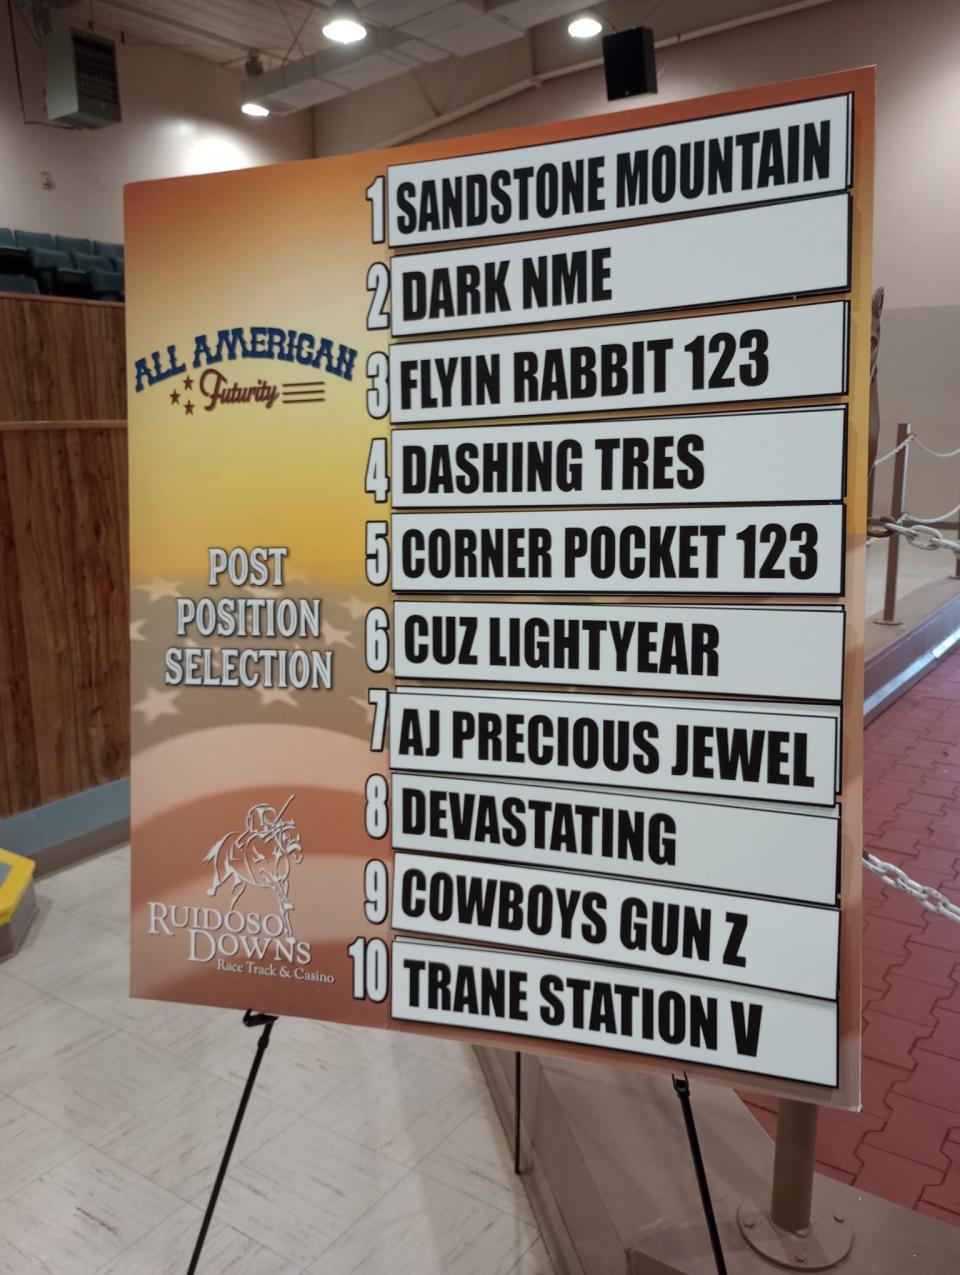 The post positions for the Grade 1, 440-yard All American Futurity to be held on Sept. 4 at Ruidoso Downs Race Track and Casino.